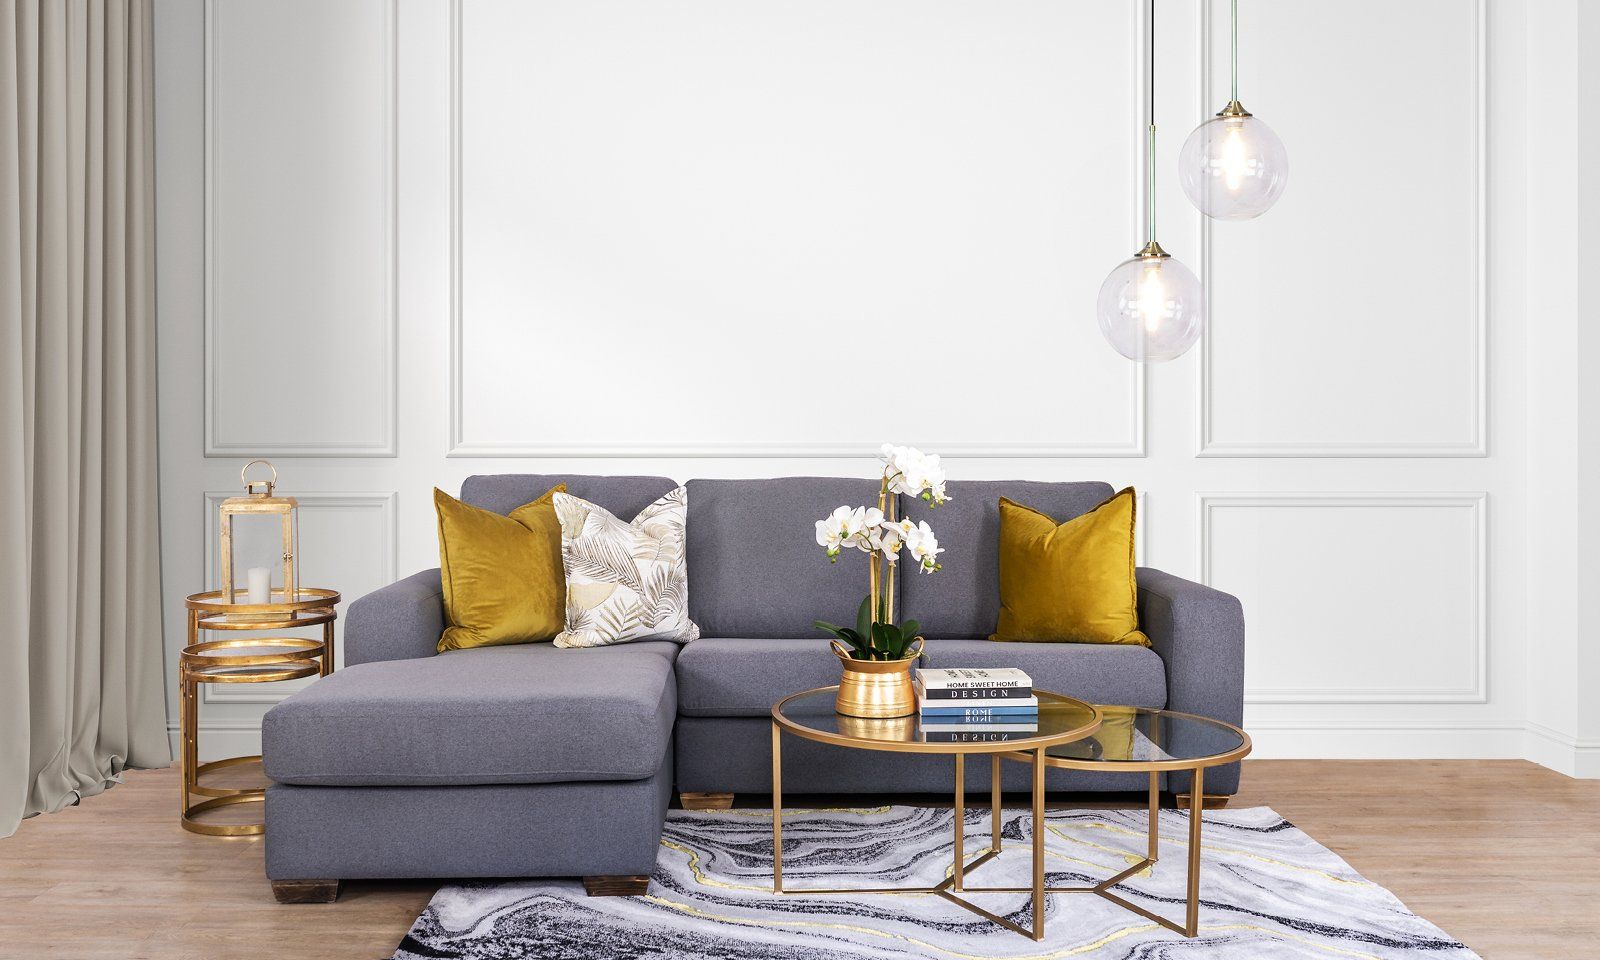 WHY AN L-SHAPE COUCH IS PERFECT FOR SMALLER LIVING ROOMS